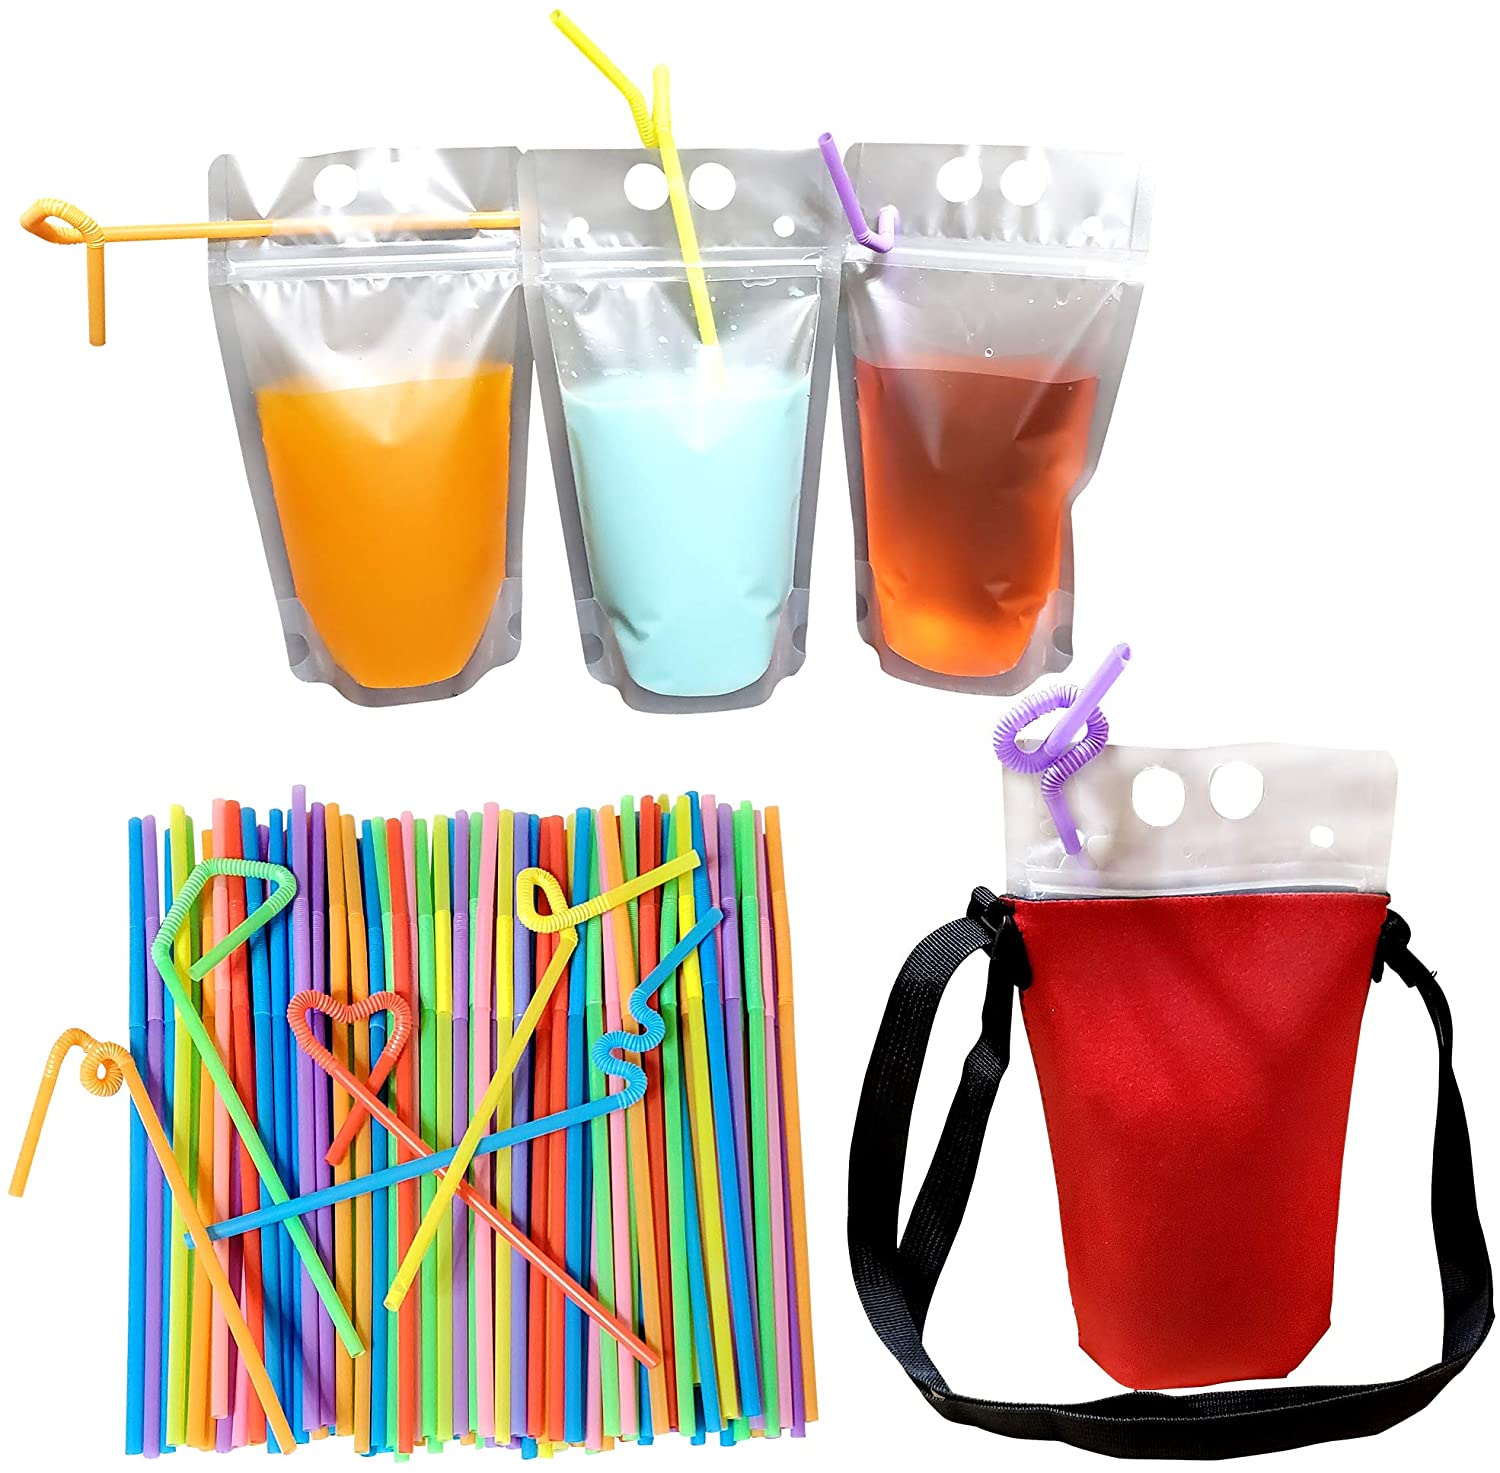 https://www.wideopencountry.com/wp-content/uploads/sites/4/eats/2021/07/Lucky-Parent-Neoprene-Drink-Insulator-Sleeve-w-Lanyard-1-Red1-Blue-20-Reusable-Adult-Juice-Pouches-with-20-Straws-Refillable-Clear-Drink-Pouches-for-Adults-Alcohol-Travel-Drink-Bags-for-Kids.jpg?resize=1500%2C1473